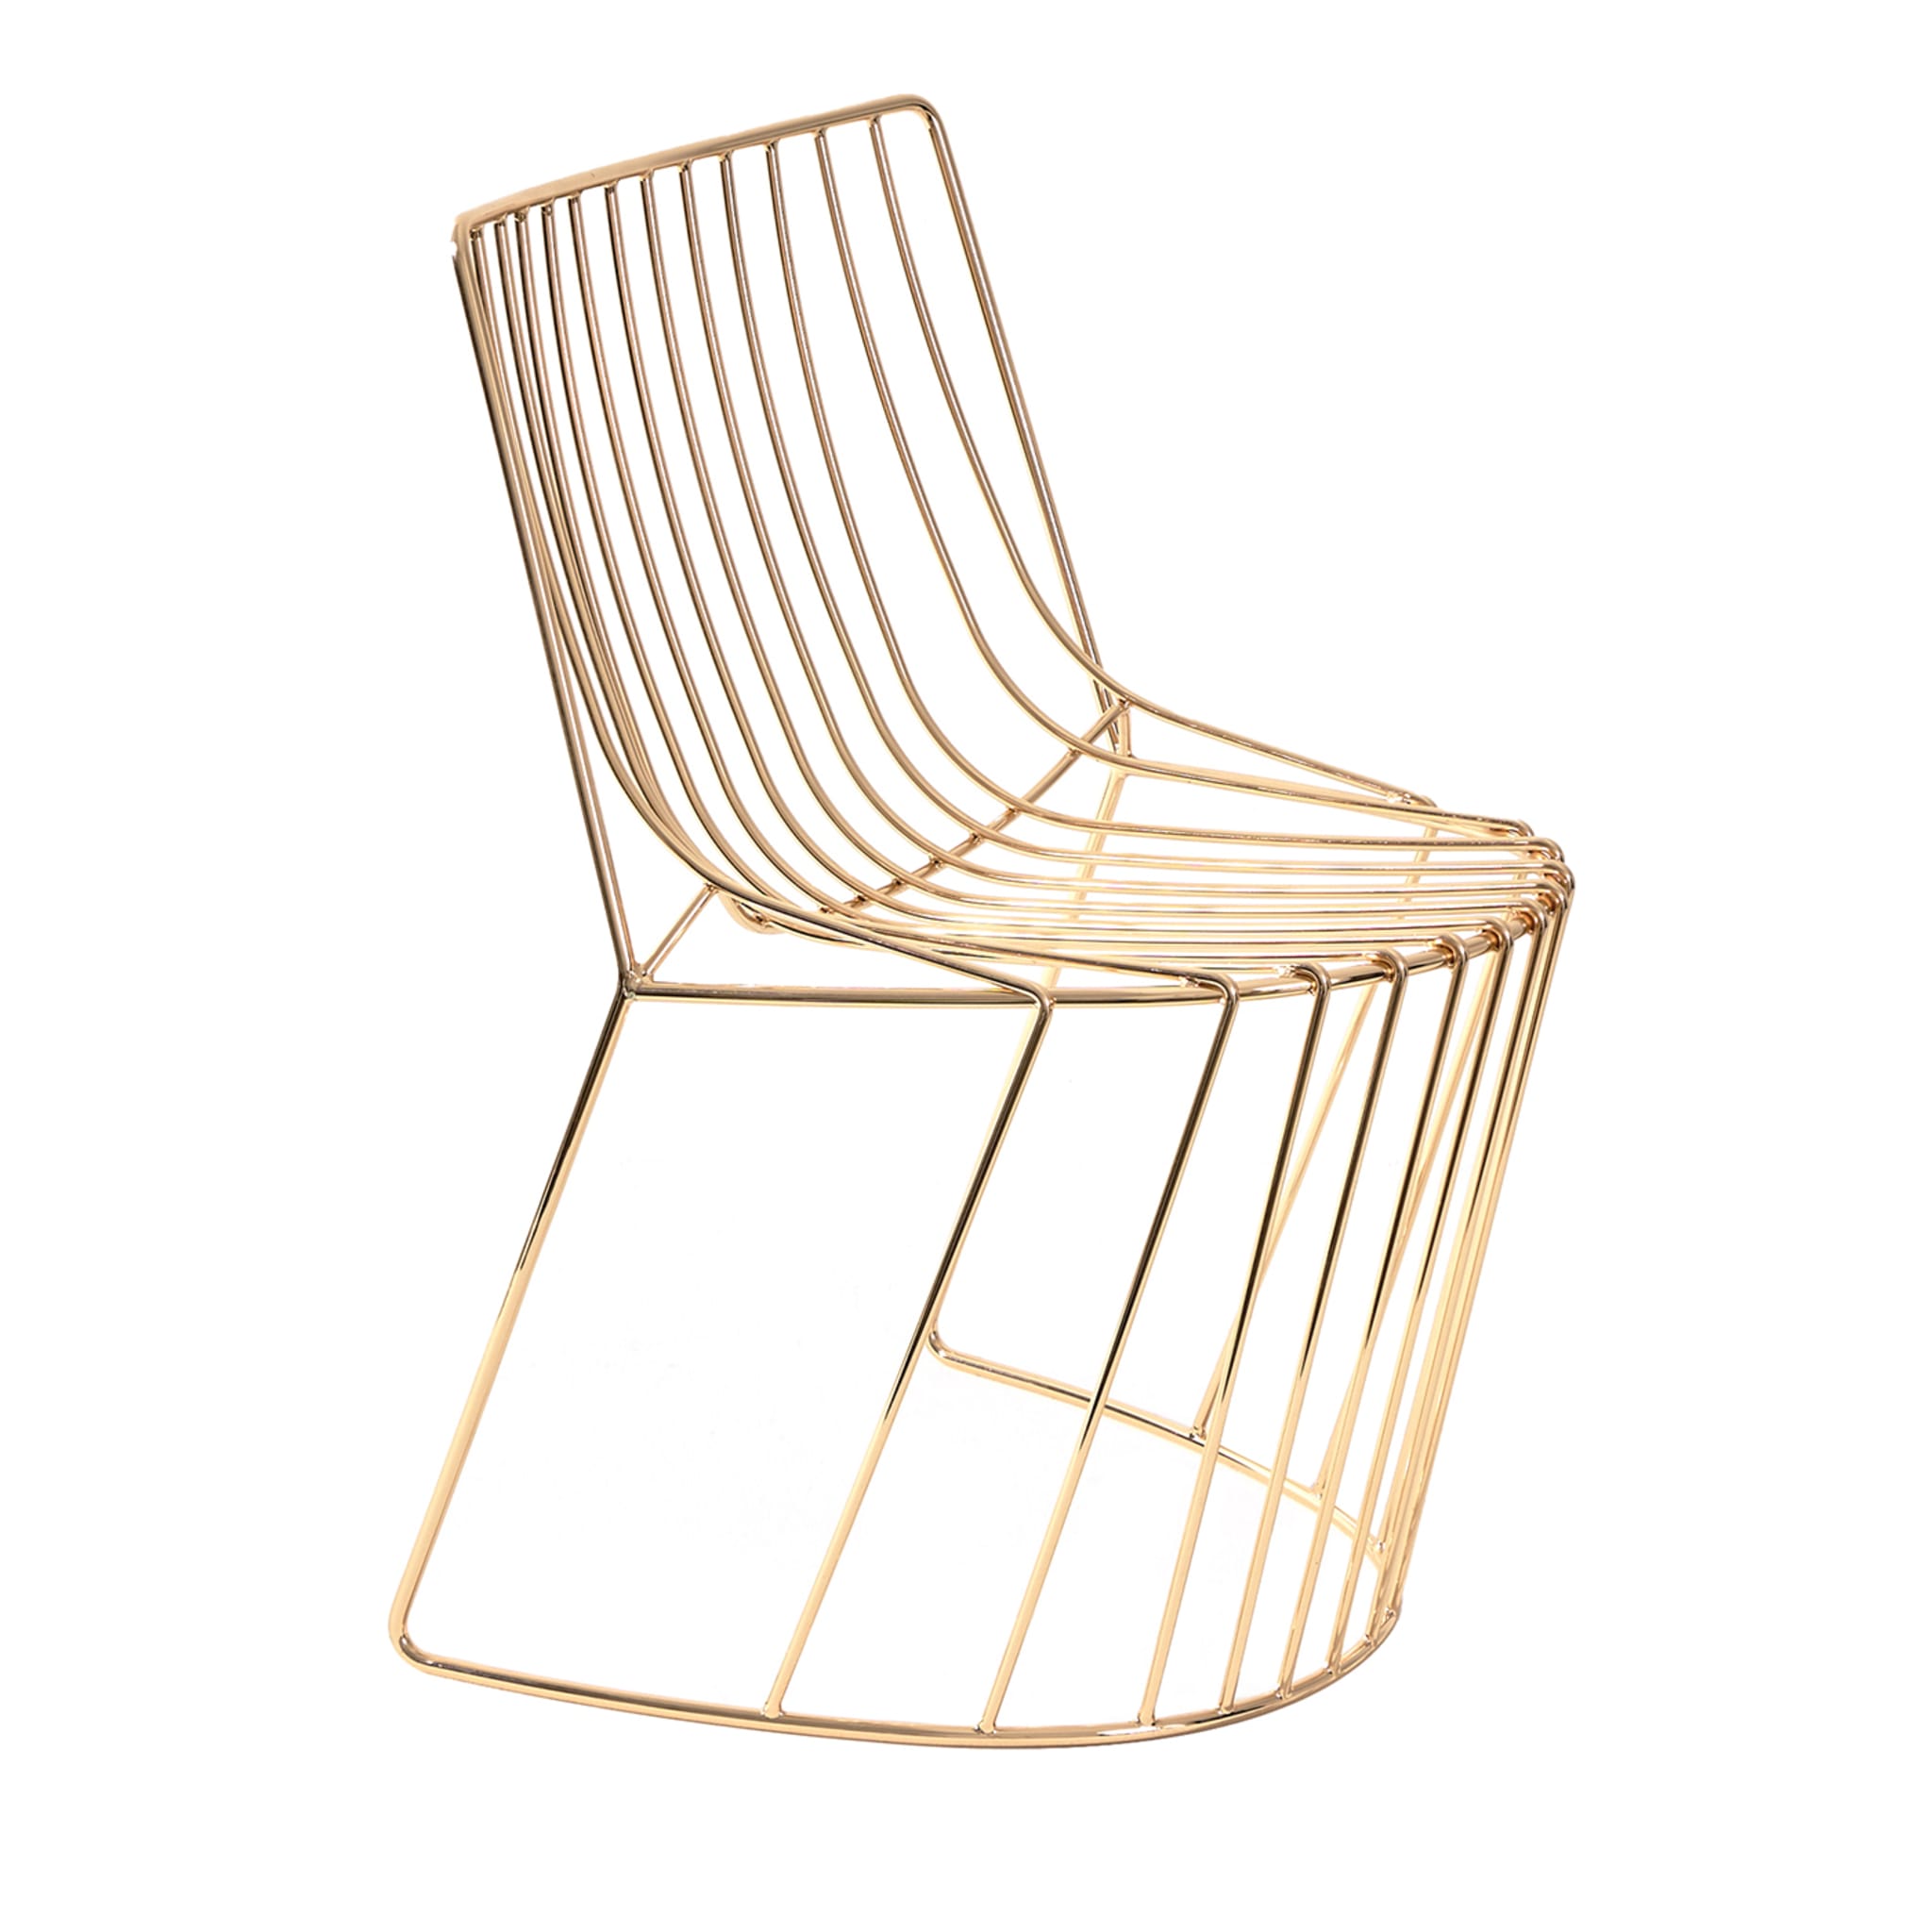 AMARONE LIGHT GOLD POLISHED CHAIR - Main view